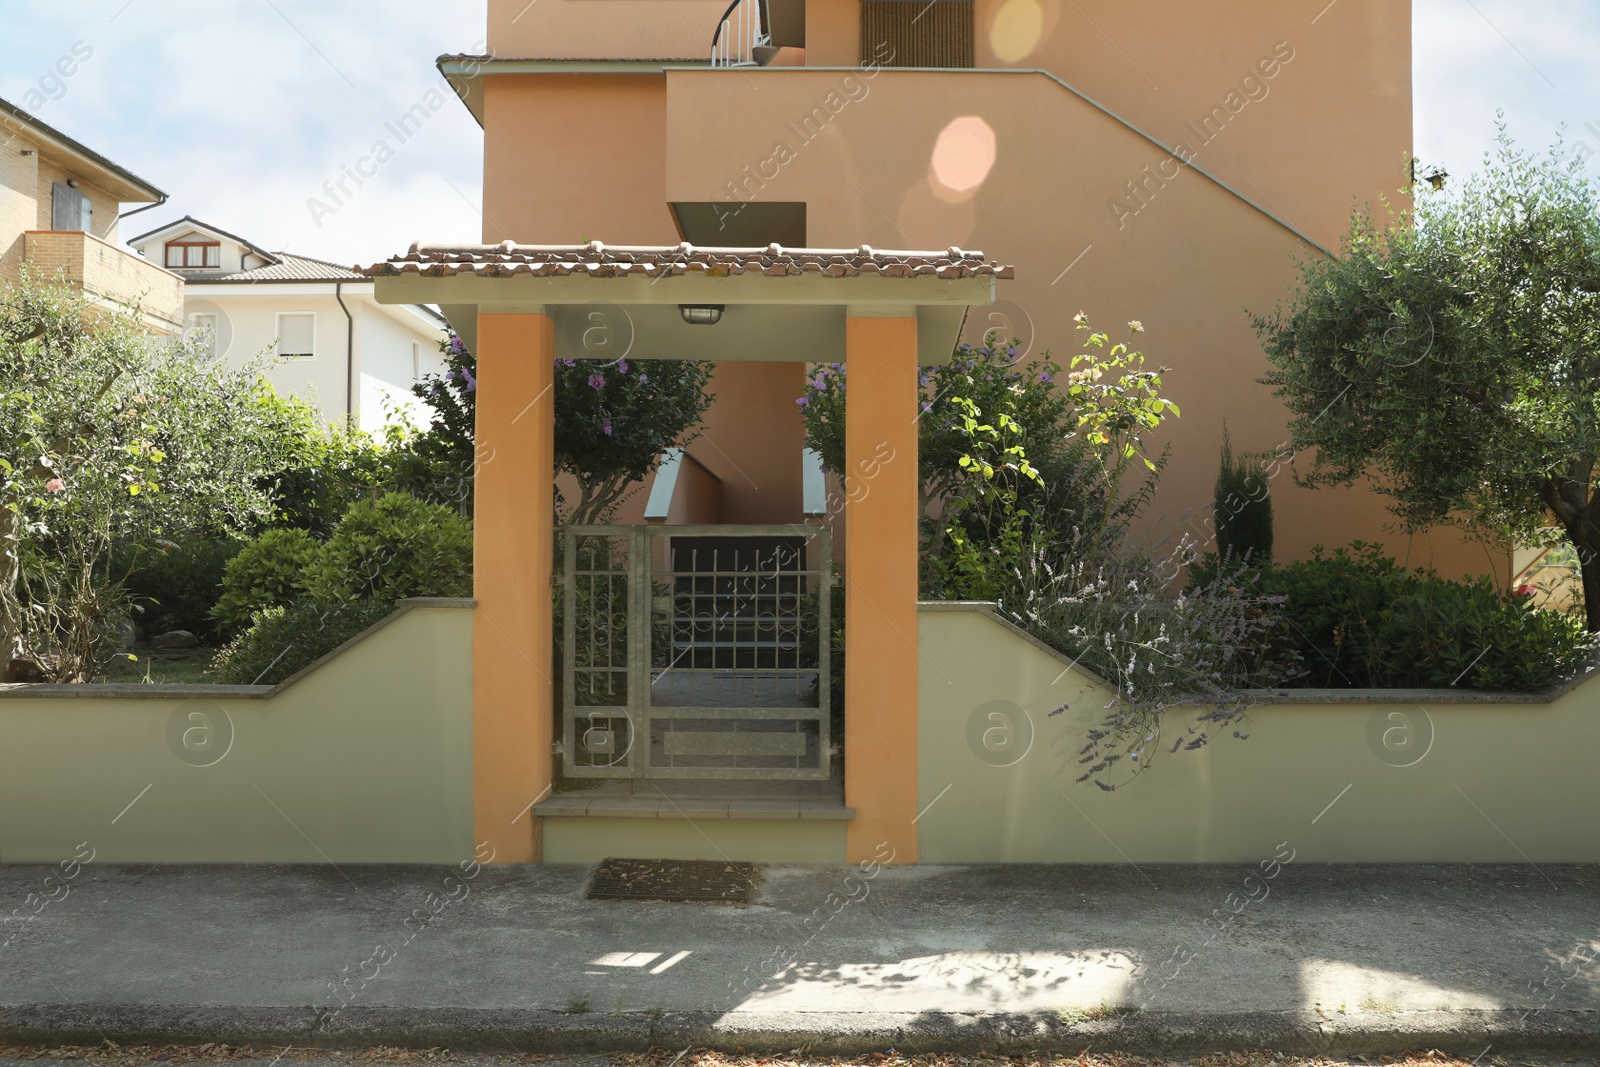 Photo of Entrance of residential house with yard on sunny day